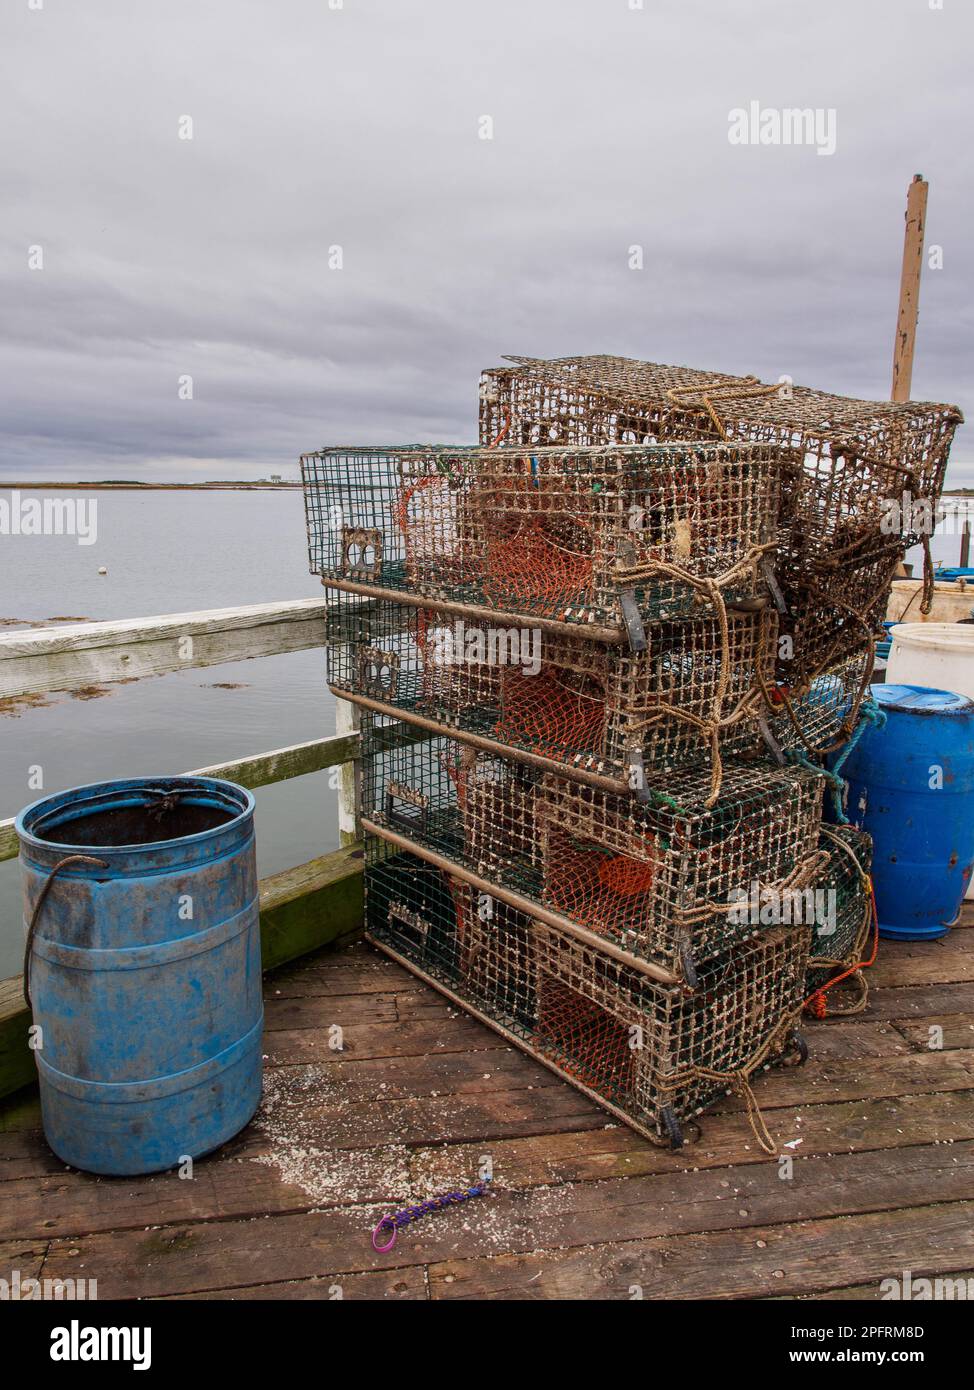 A lobster trap, lobster pot or lobster cage is a portable trap